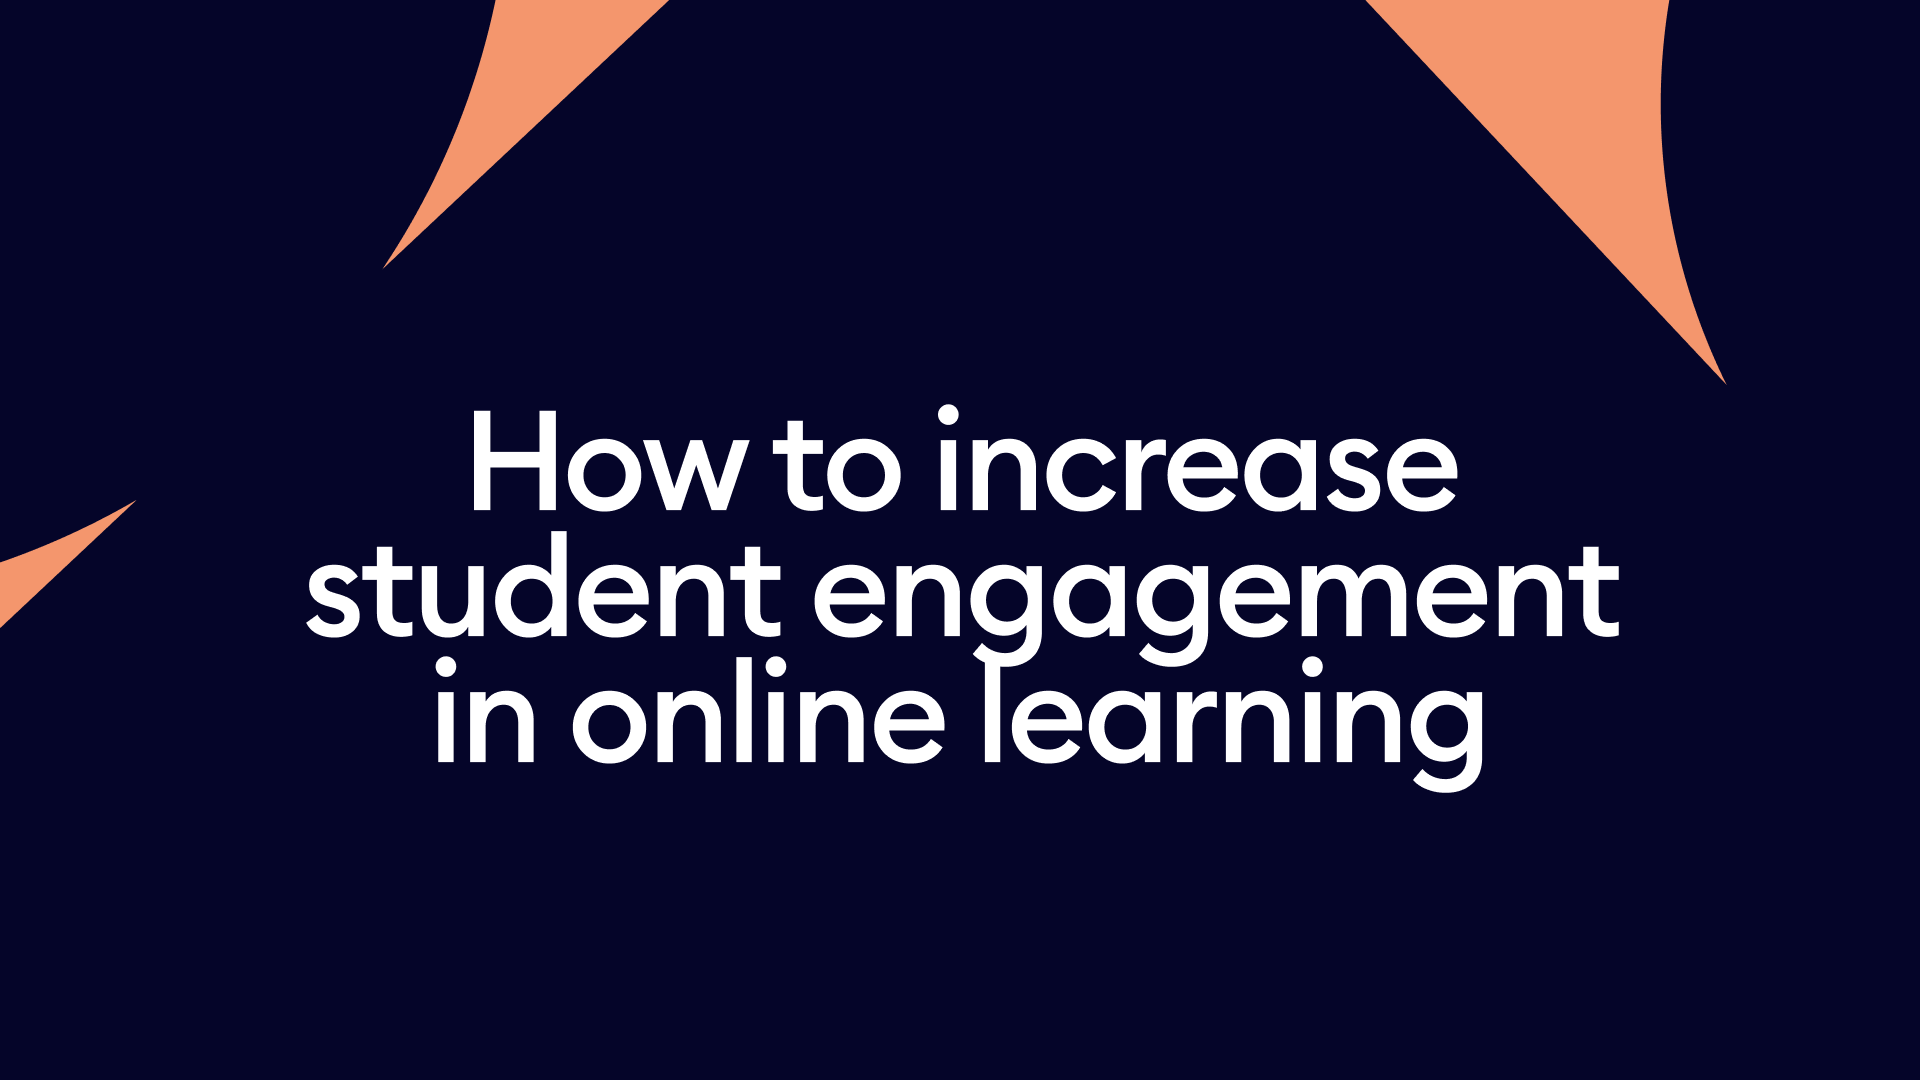 How to increase student engagement in online learning